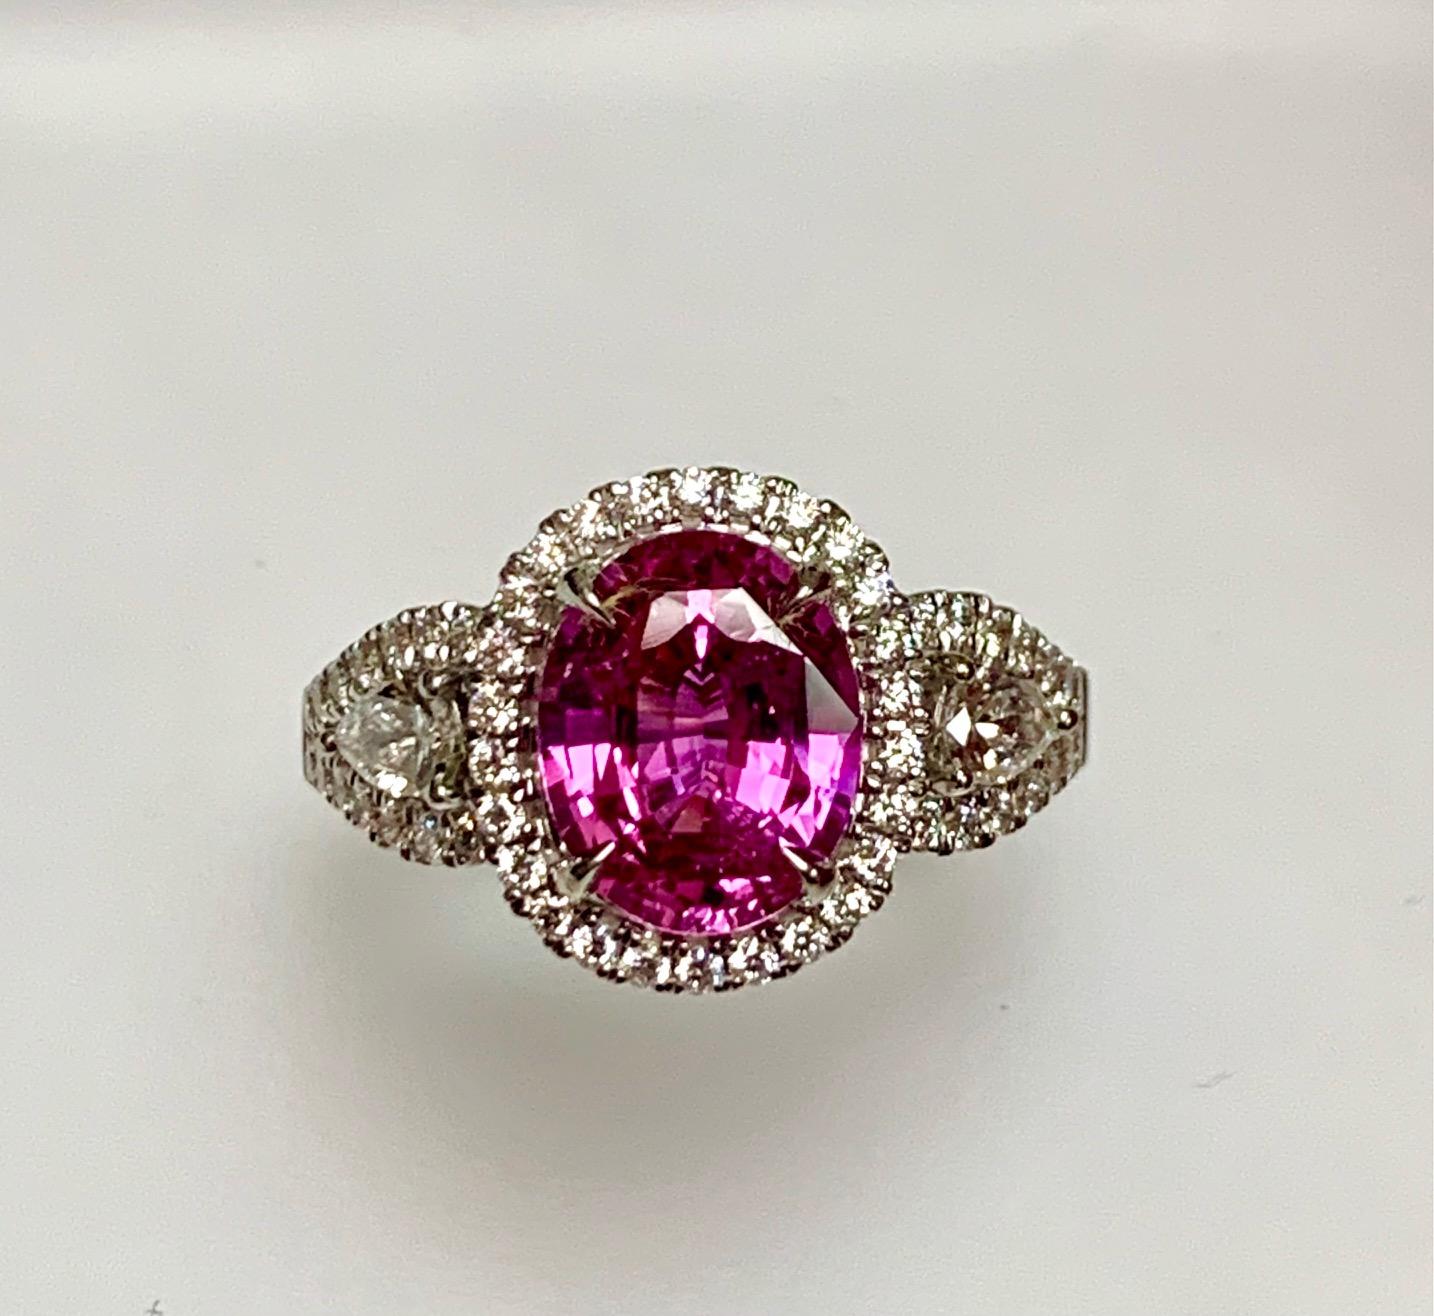 3.07 Carat oval pink sapphire set in 18k white gold ring with 0.78 carat round diamonds around it and on the shank and  pear shape diamonds on the split shank .